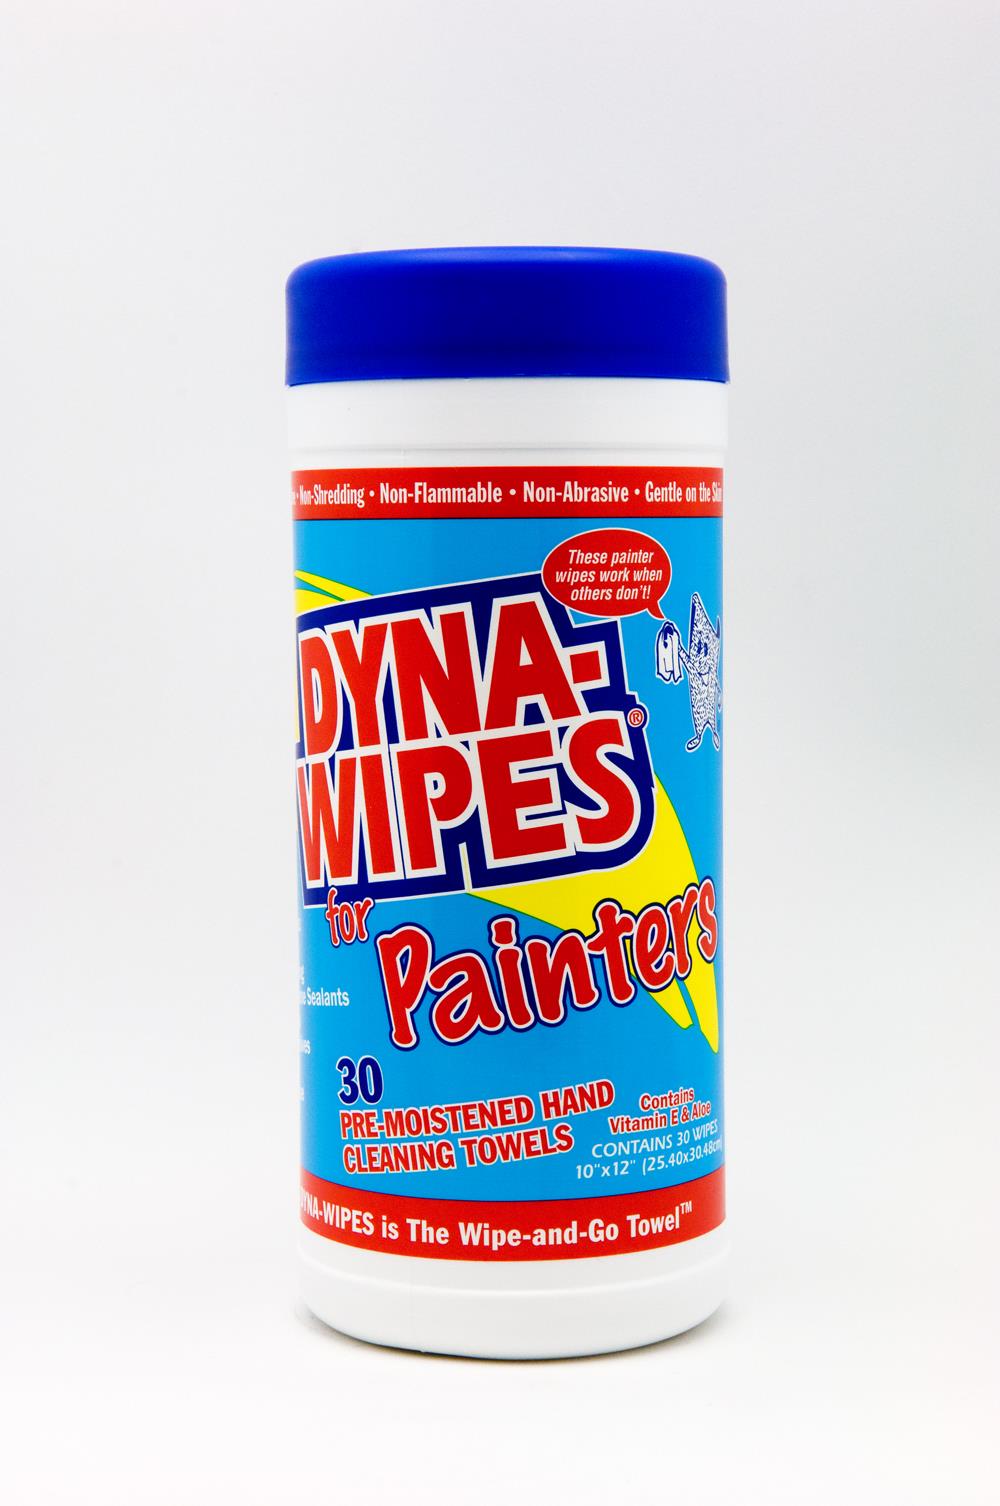 DYNA-WIPES ® for Painters